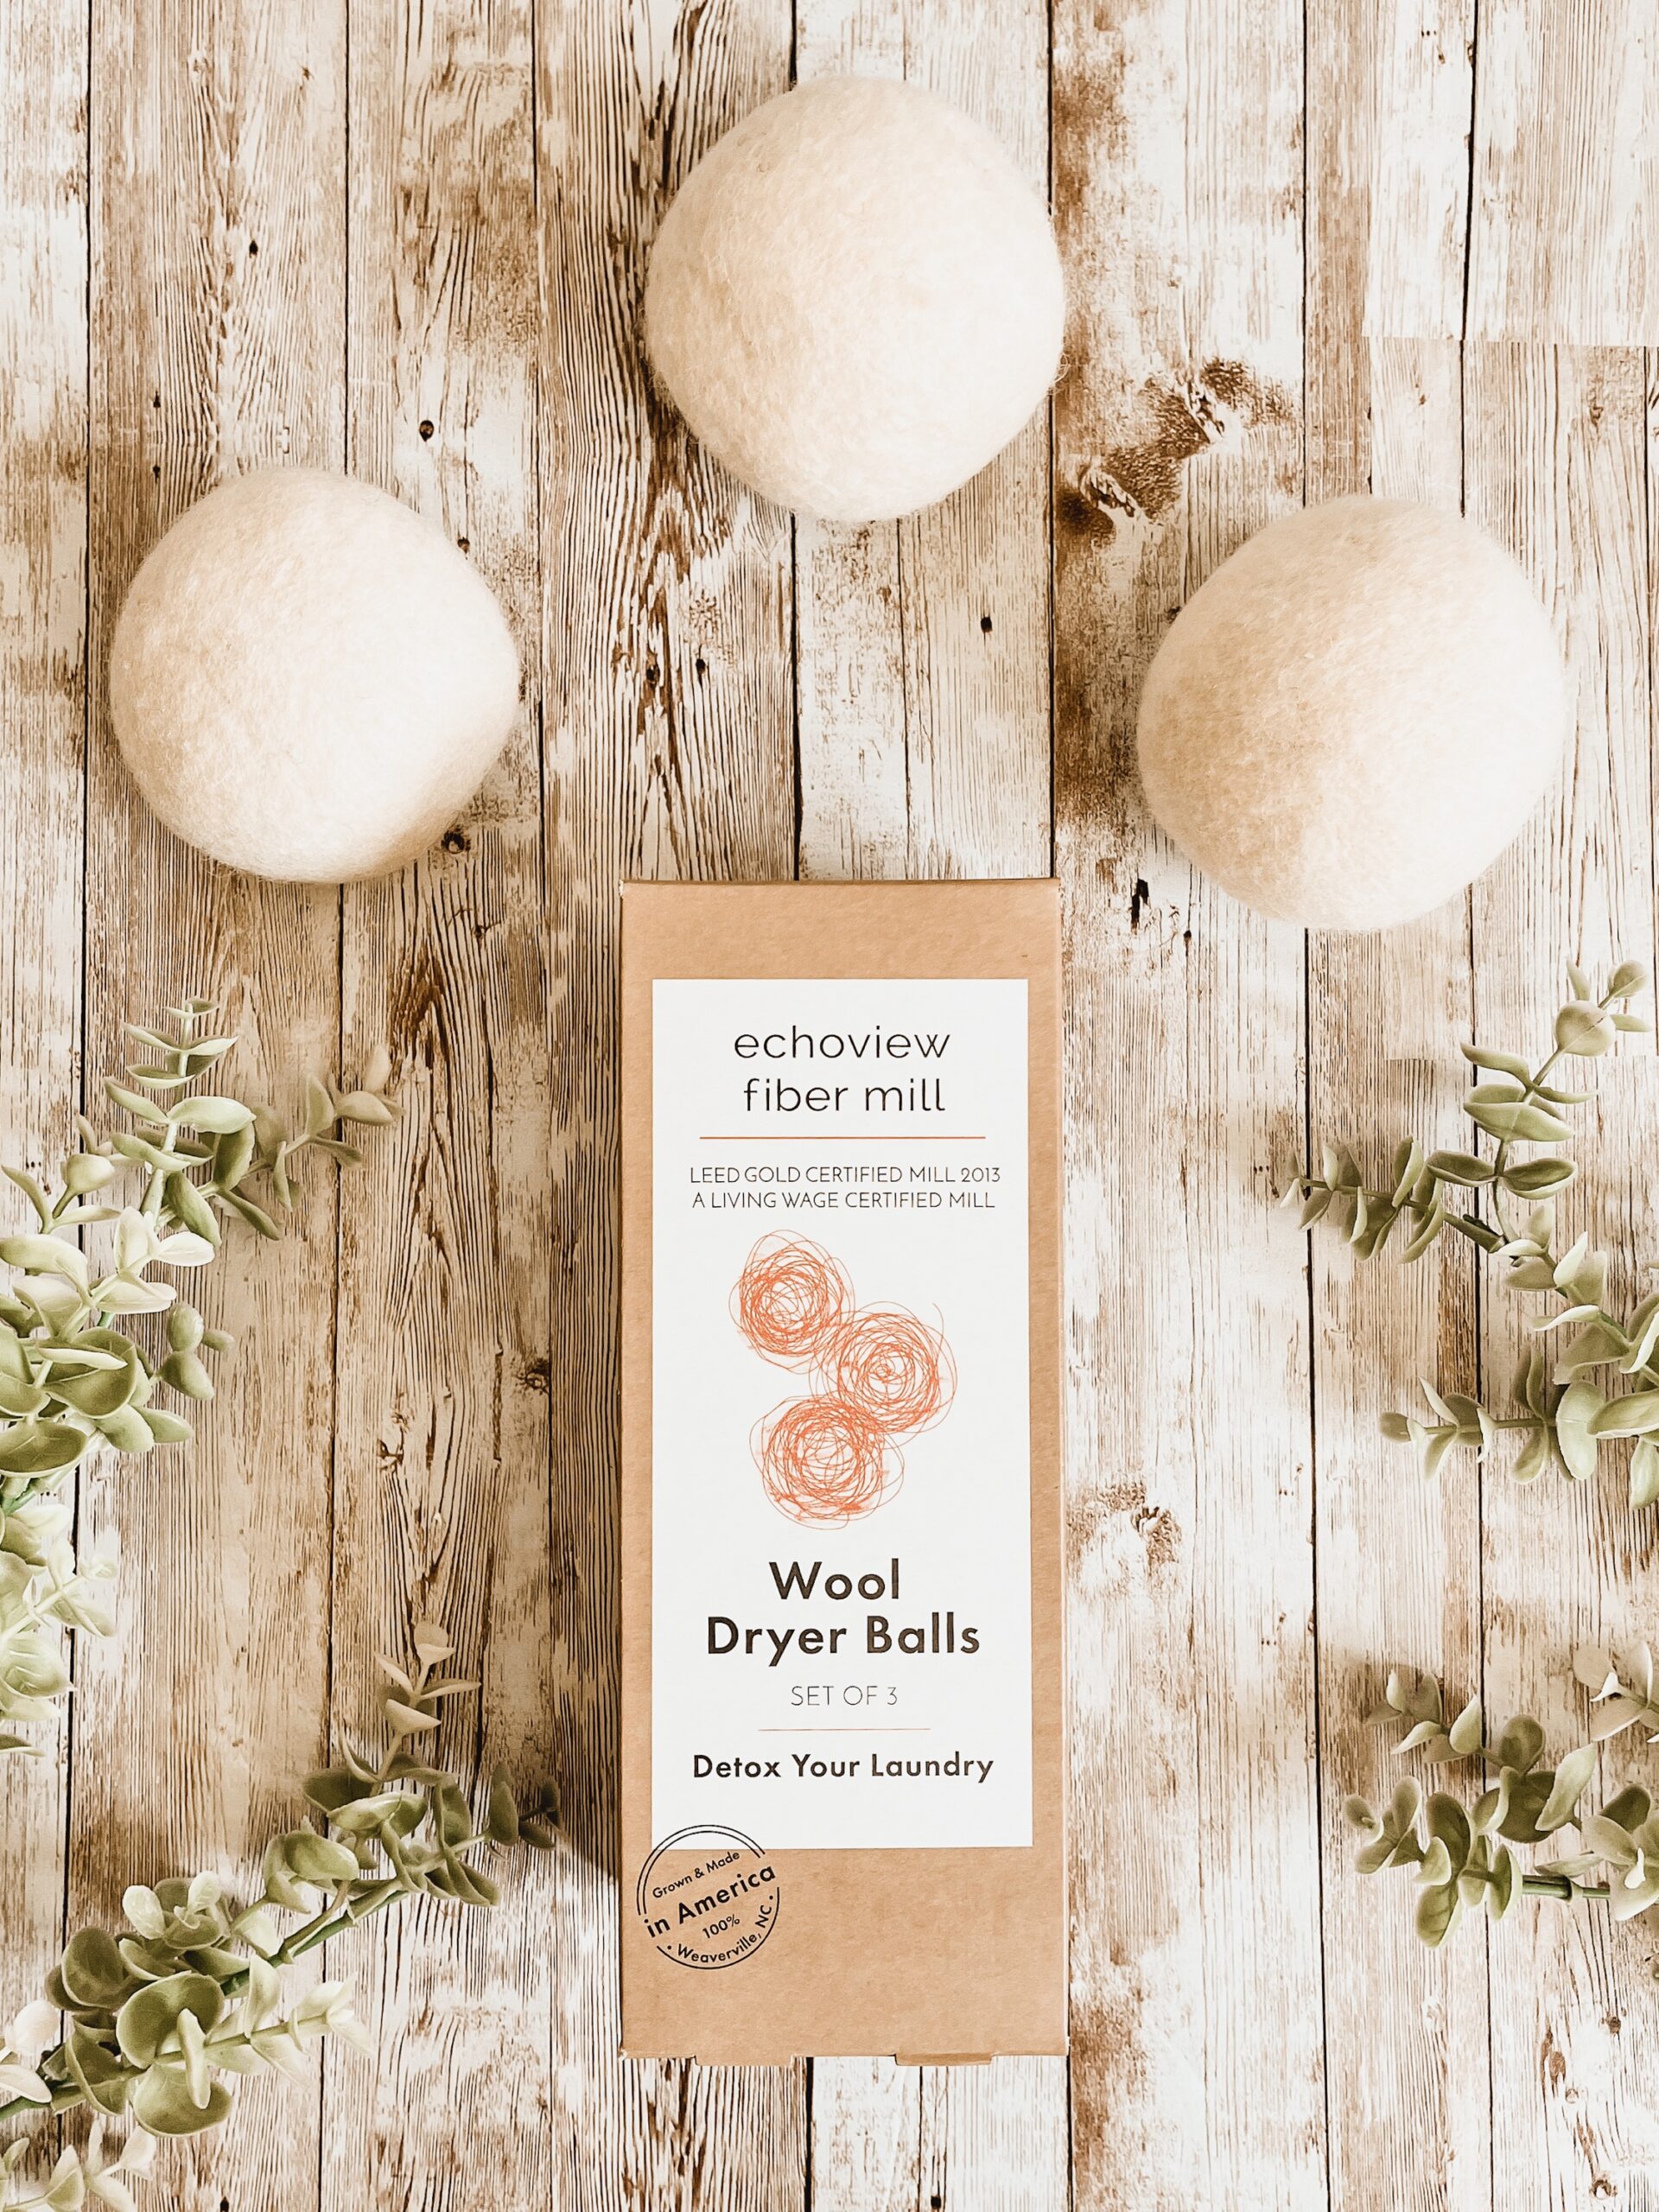 A box of dryer balls is photographed with 3 dryer balls and plants around it